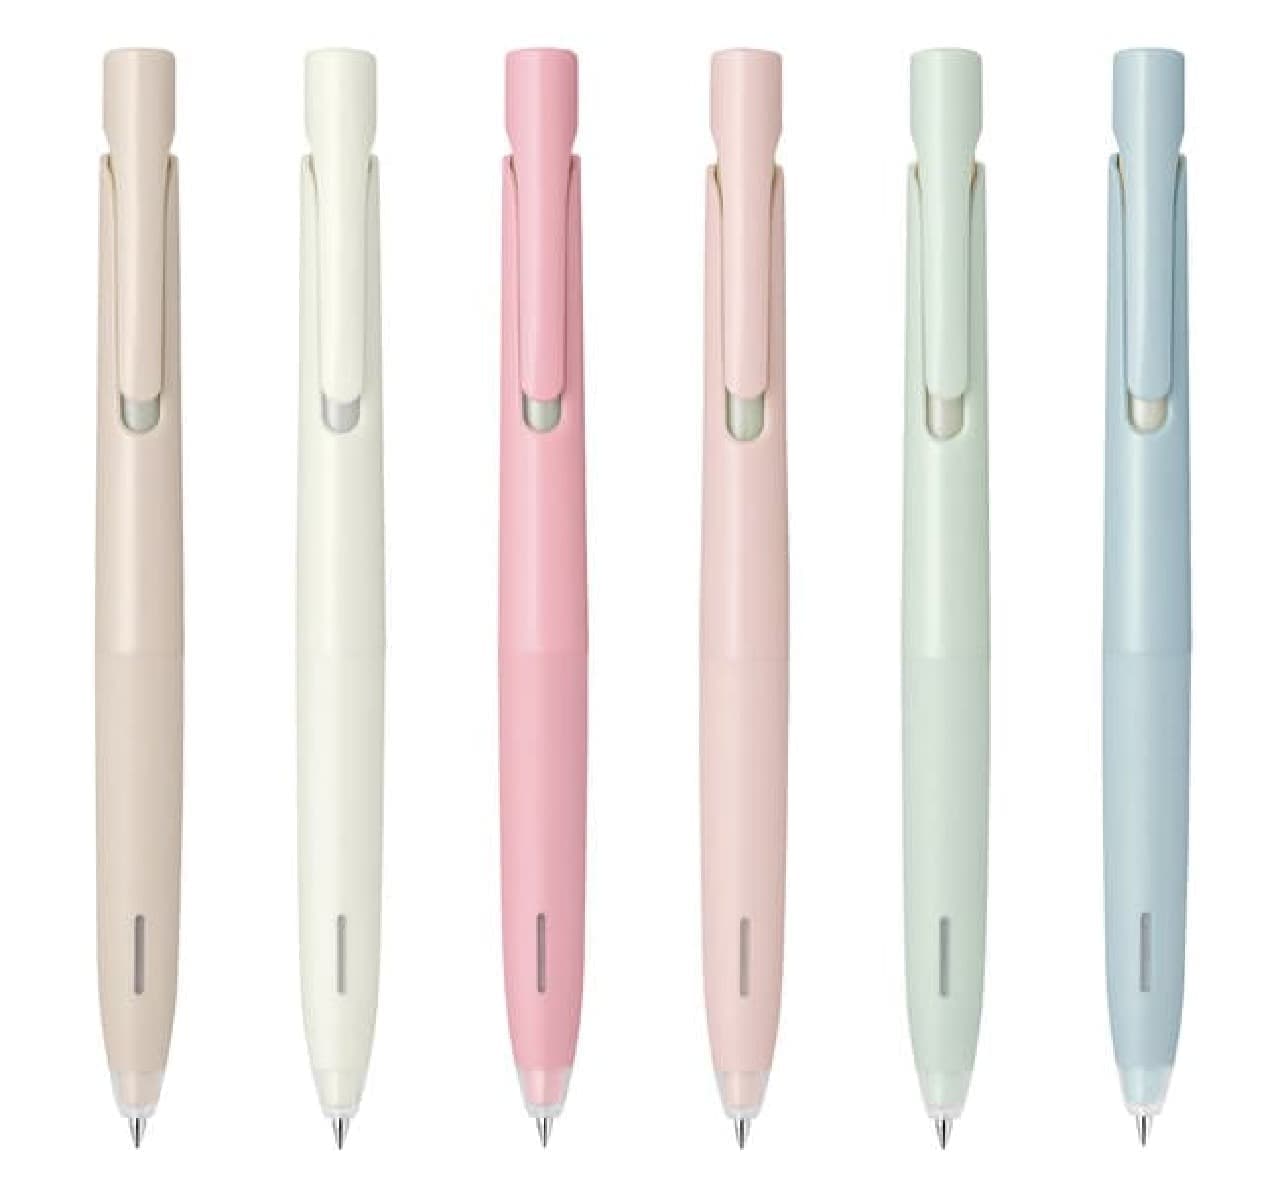 Limited-edition "Bren" ballpoint pens come in six colors, including rose pink and mist green.